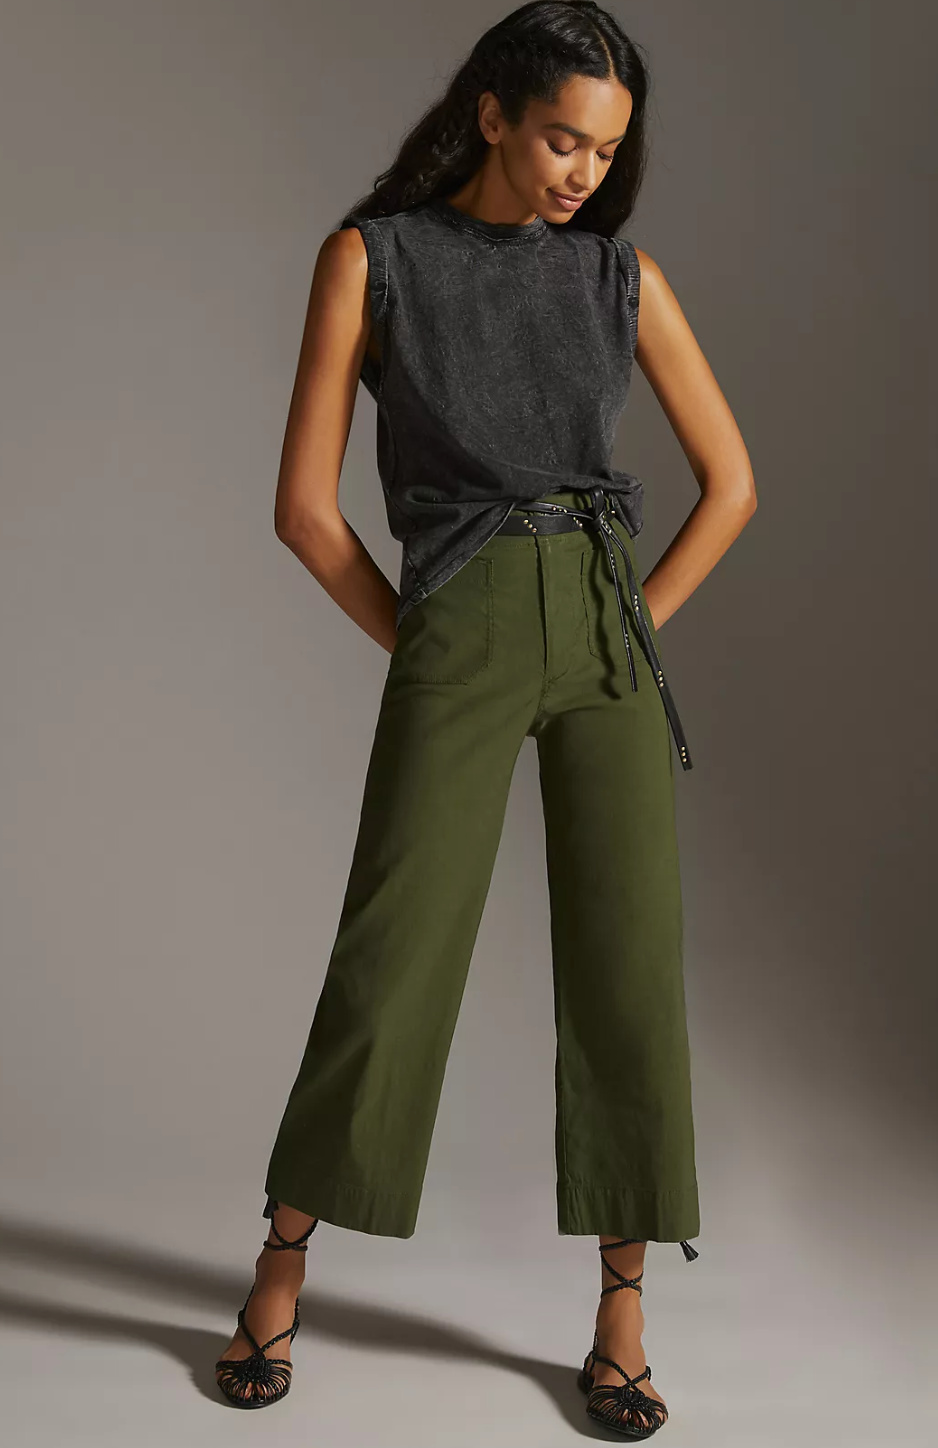 Crop Pants for Petites  The Budget Fashionista